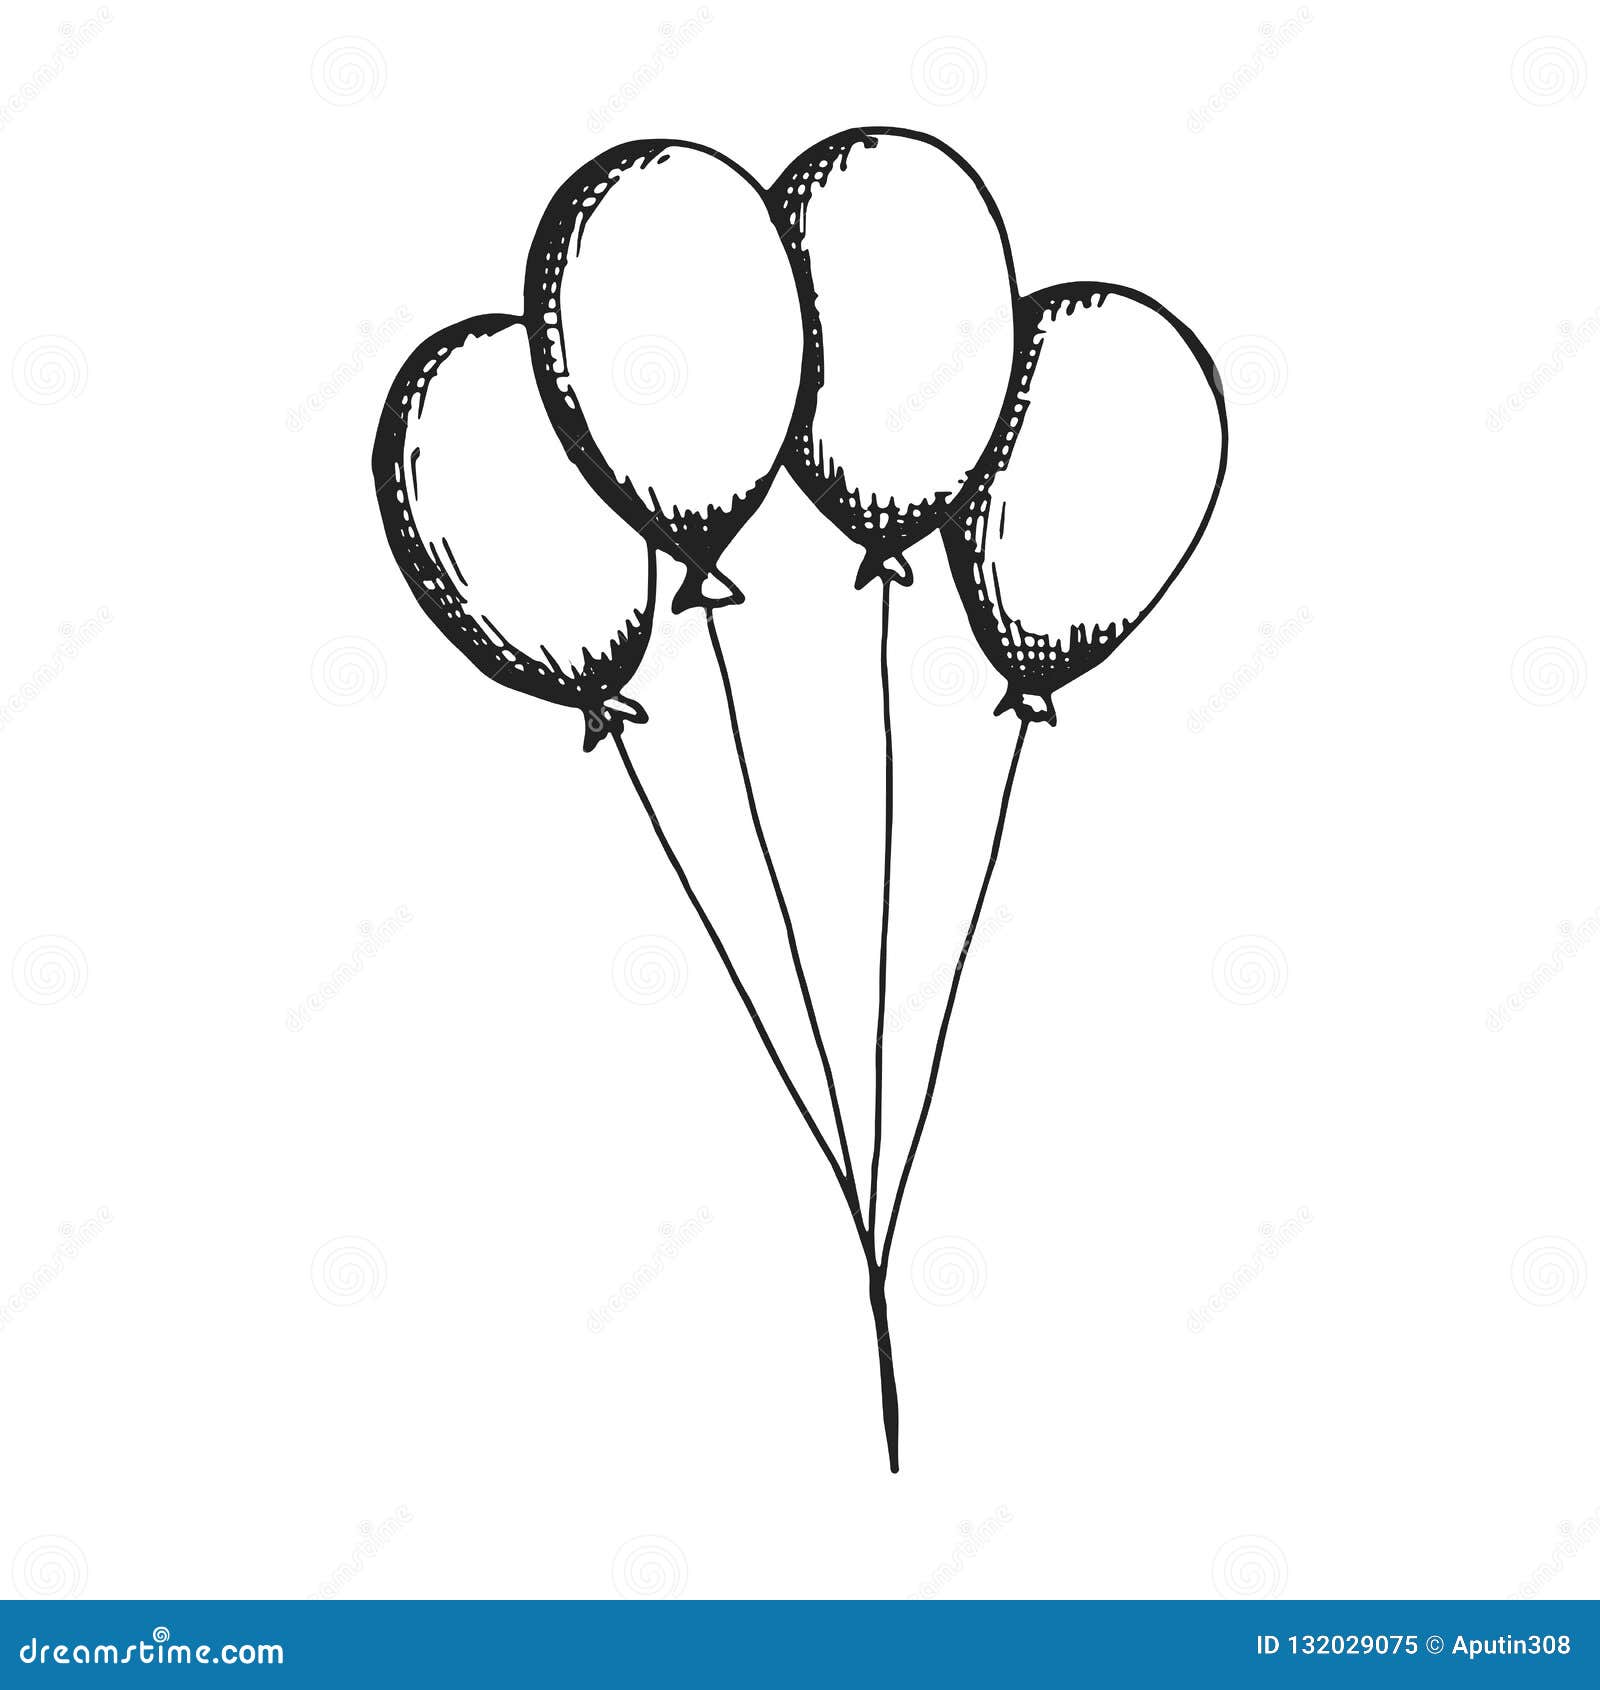 How to Draw a Balloon  Step by Step Balloon Drawing for Kids